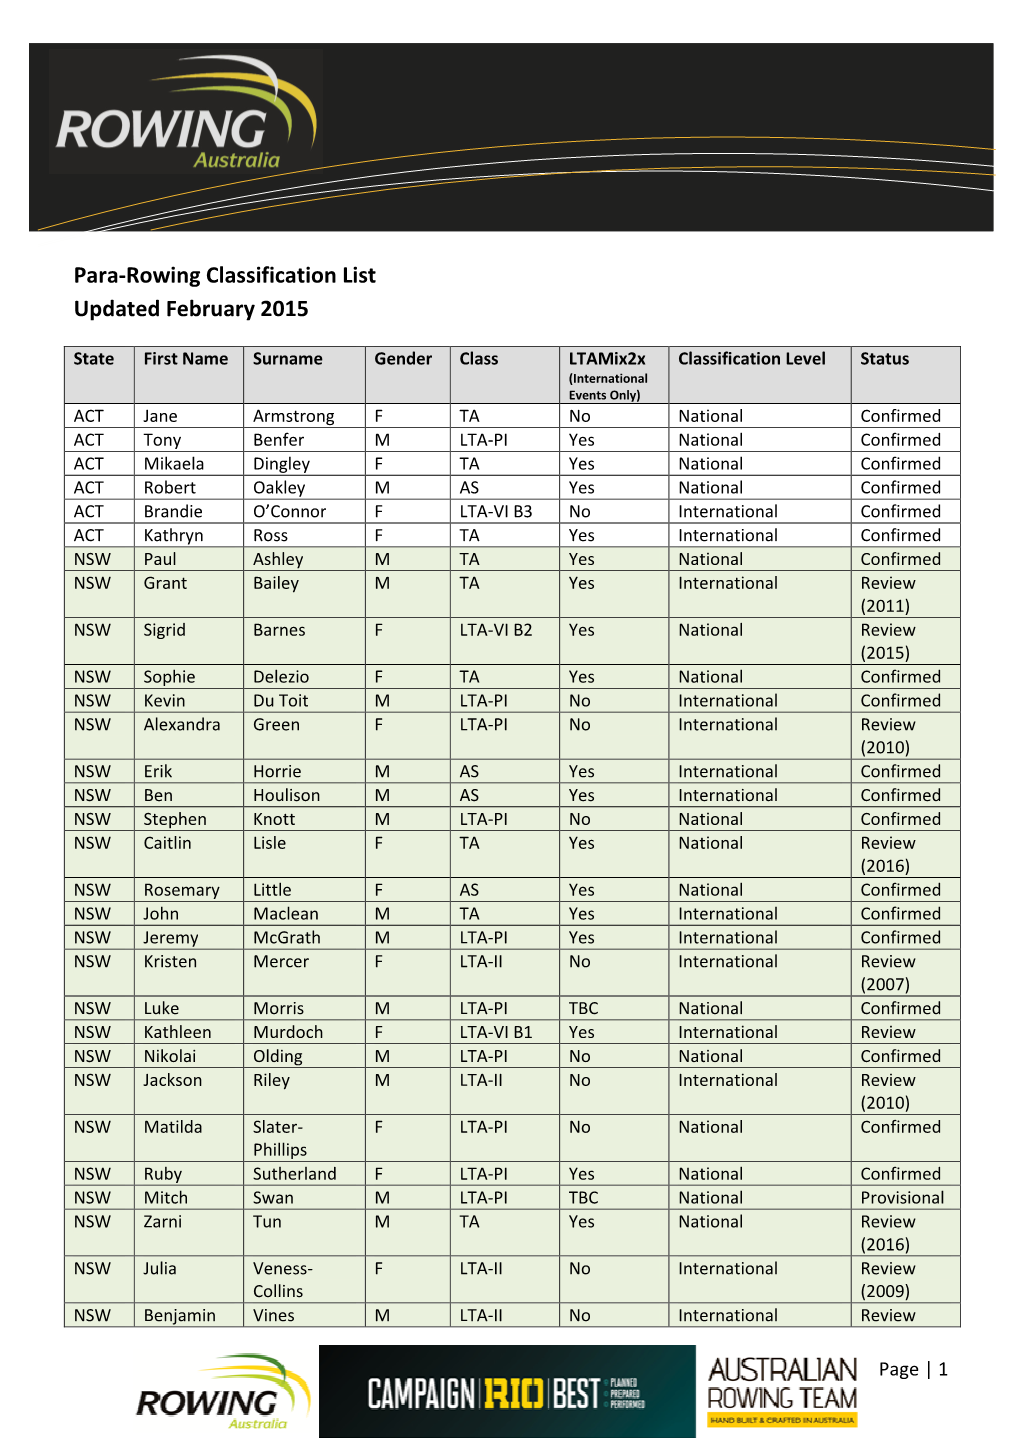 Para-Rowing Classification List Updated February 2015